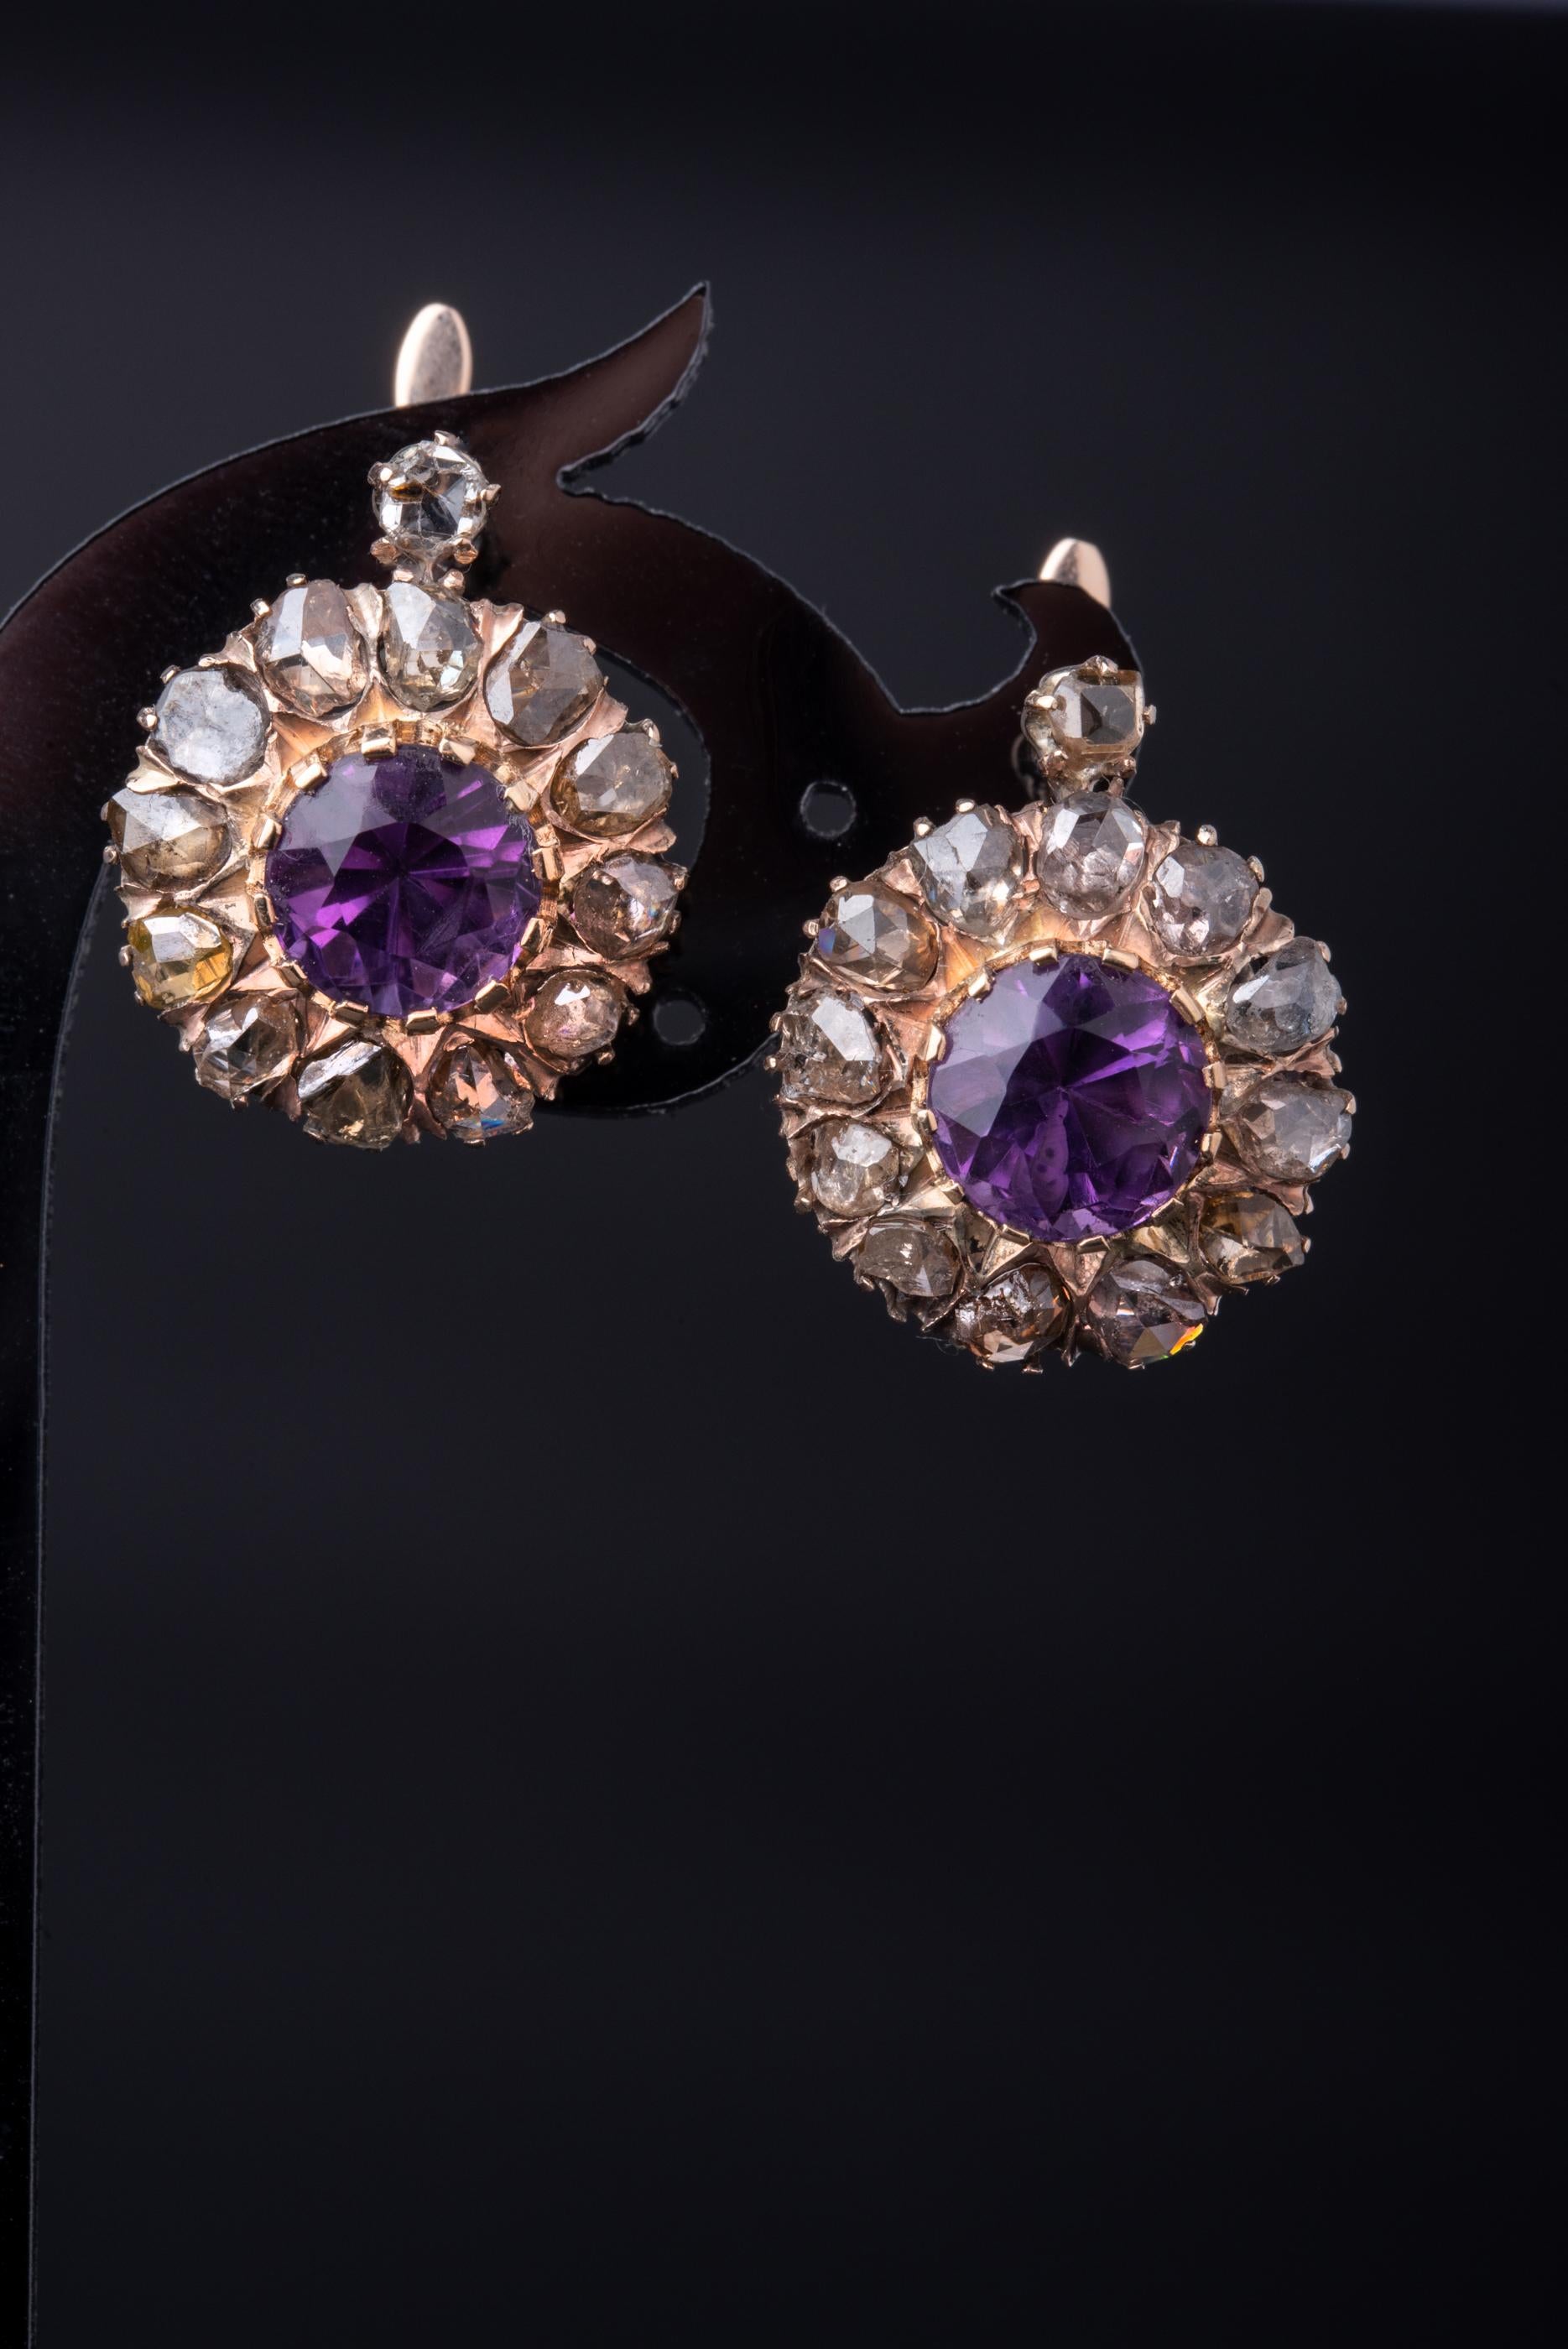 A stunning pair of antique diamond earrings made of solid 12 ct gold. 

The earrings have a classic floral design and are set with 26 rose cut diamonds (13 diamonds each). The stones are preserved in a very good condition with a minor surface wear